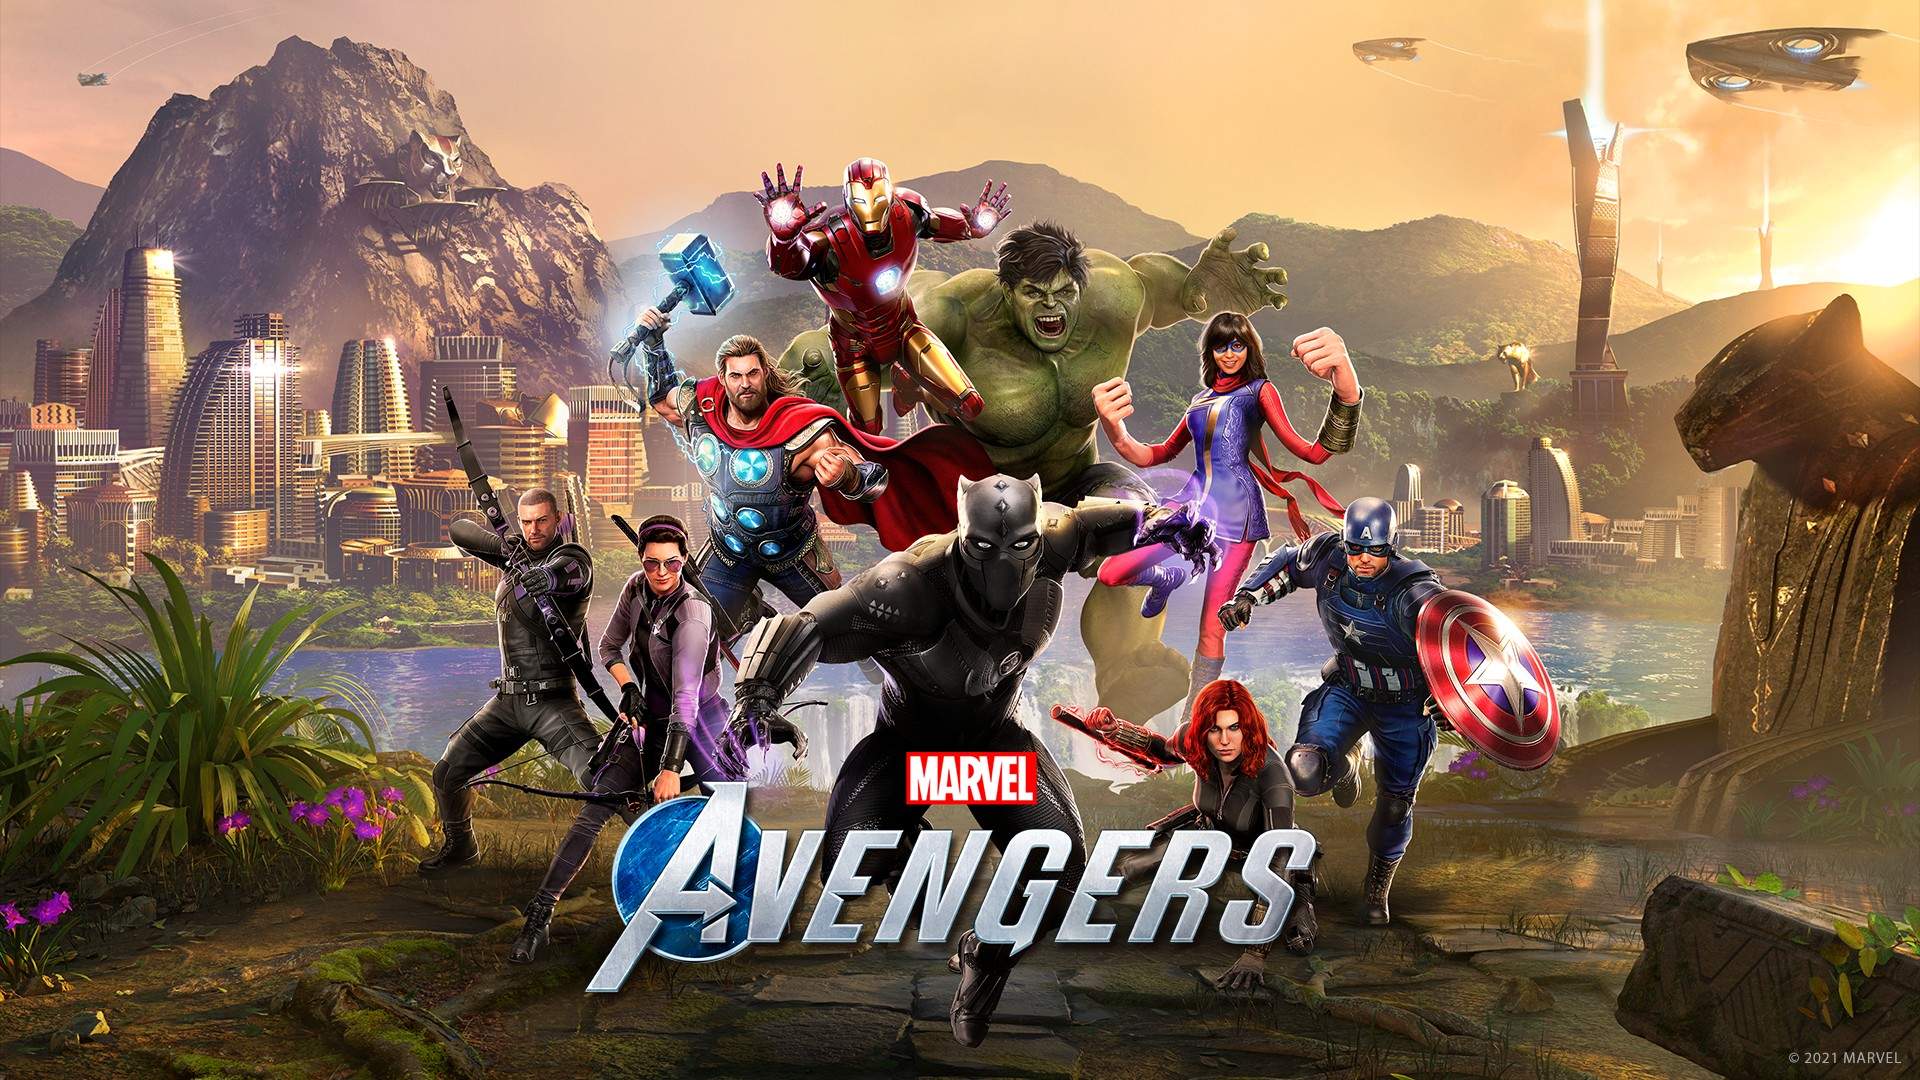 Square Enix has announced that Marvel’s Avengers is coming to Xbox Game Pass this week.